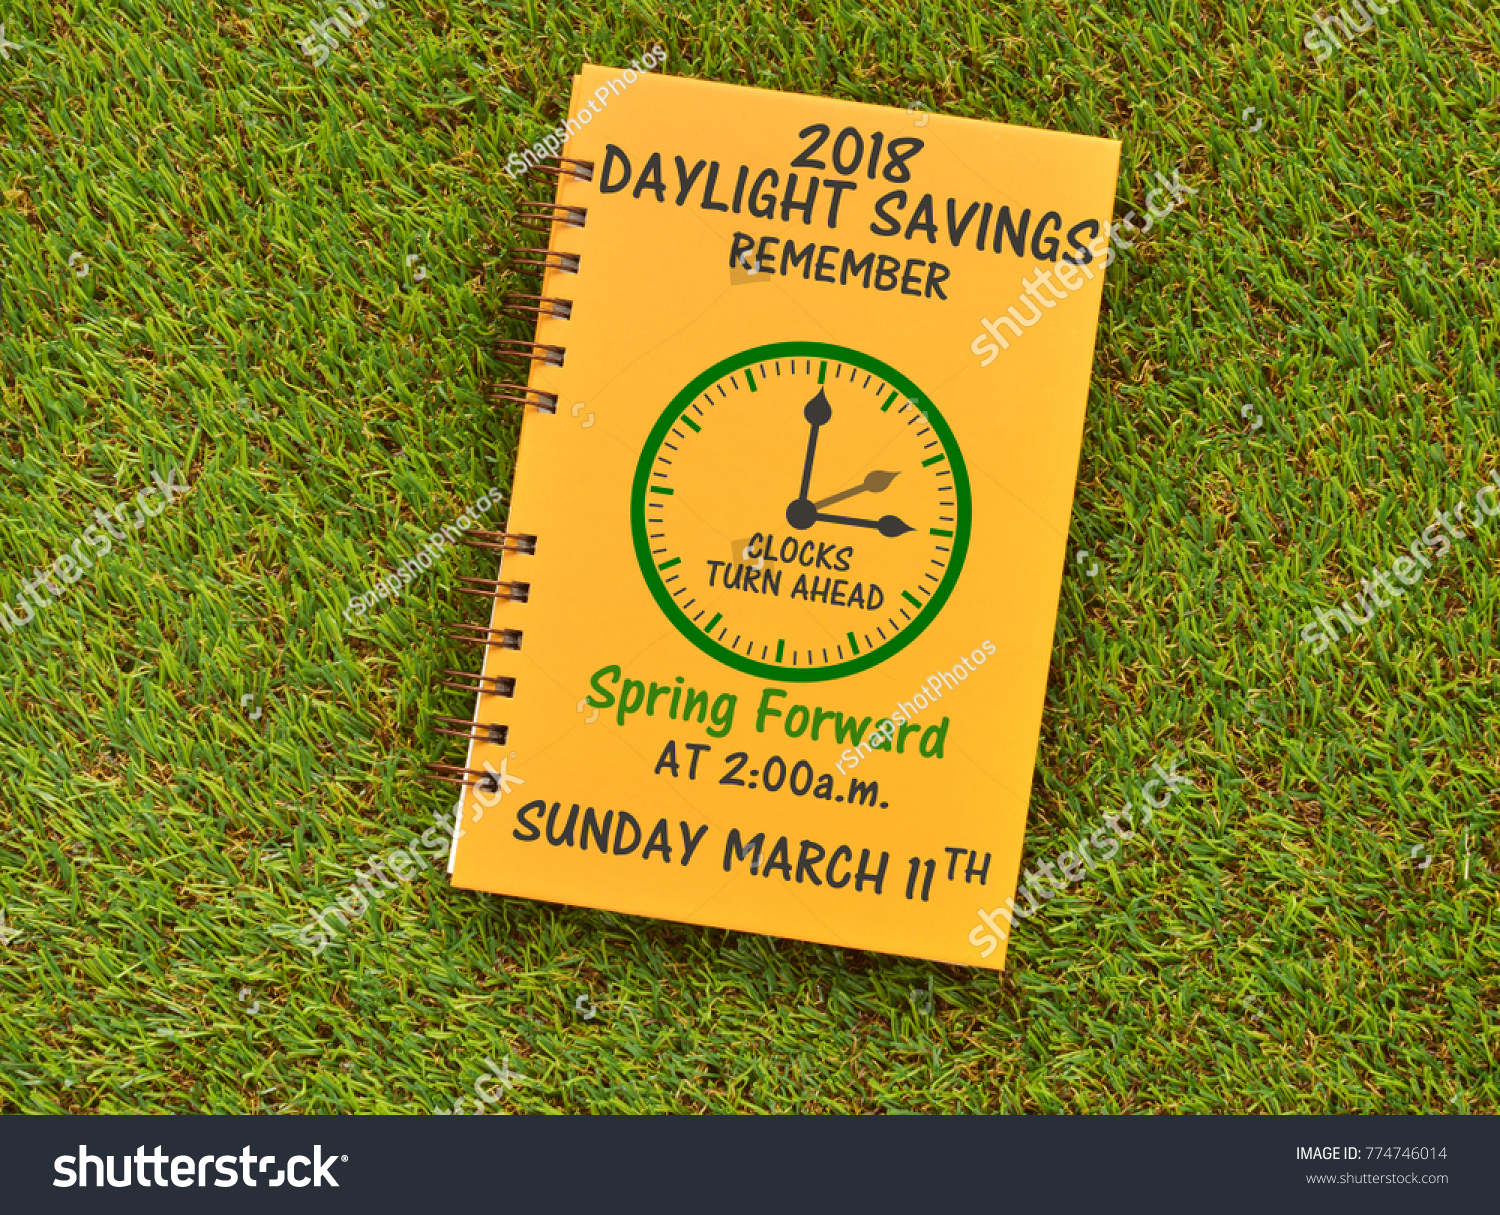 2018 Daylight Savings Remember clock turn ahead Spring Forward at 2:00 am Sunday March 11th on grass #774746014